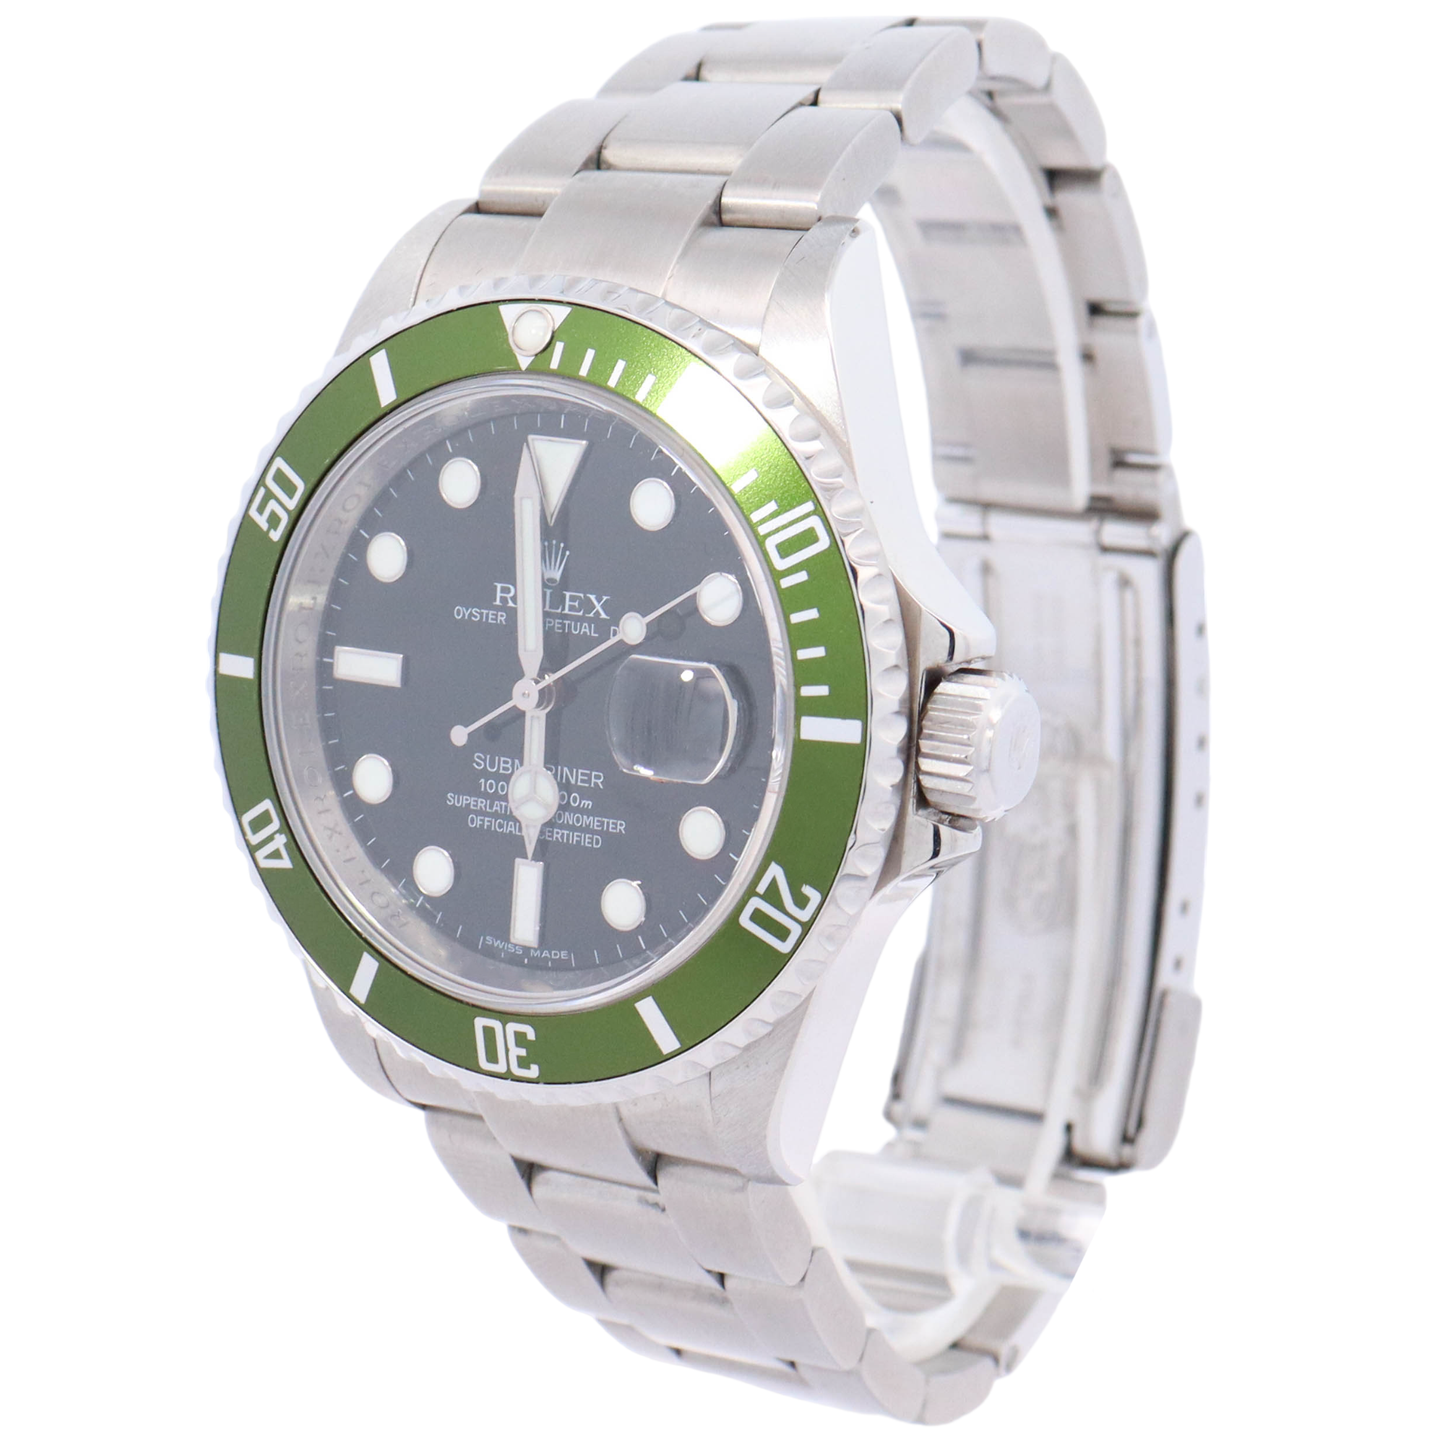 Rolex Submariner Date "Kermit" 40mm Stainless Steel Black Dot Dial Watch Reference# 16610V - Happy Jewelers Fine Jewelry Lifetime Warranty